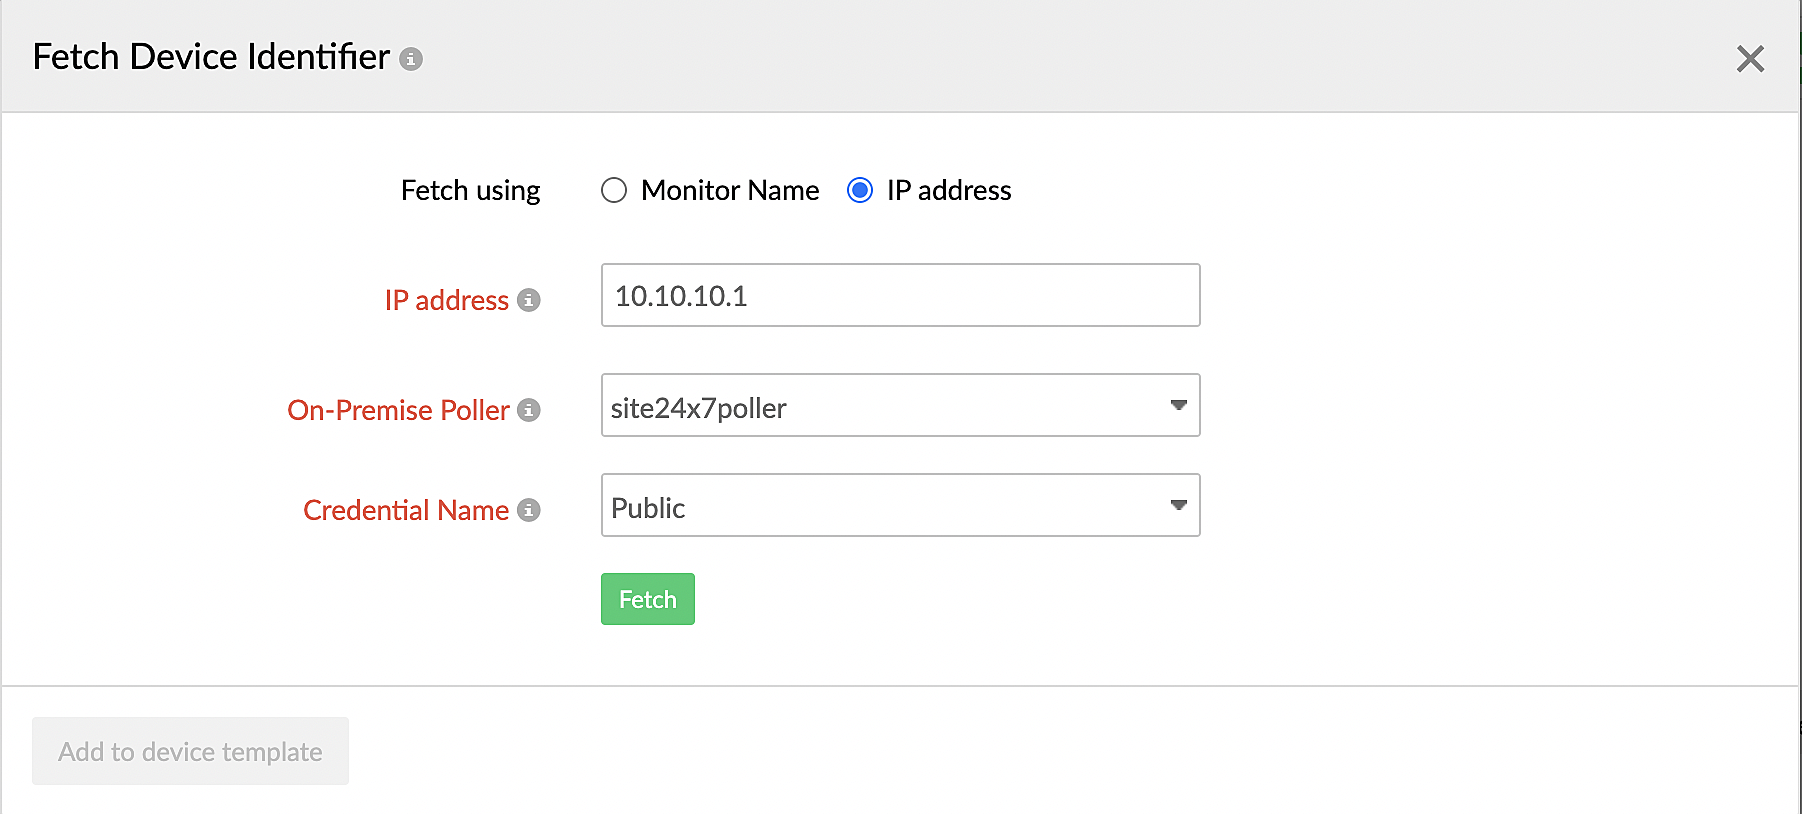 Fetching device identifier with IP